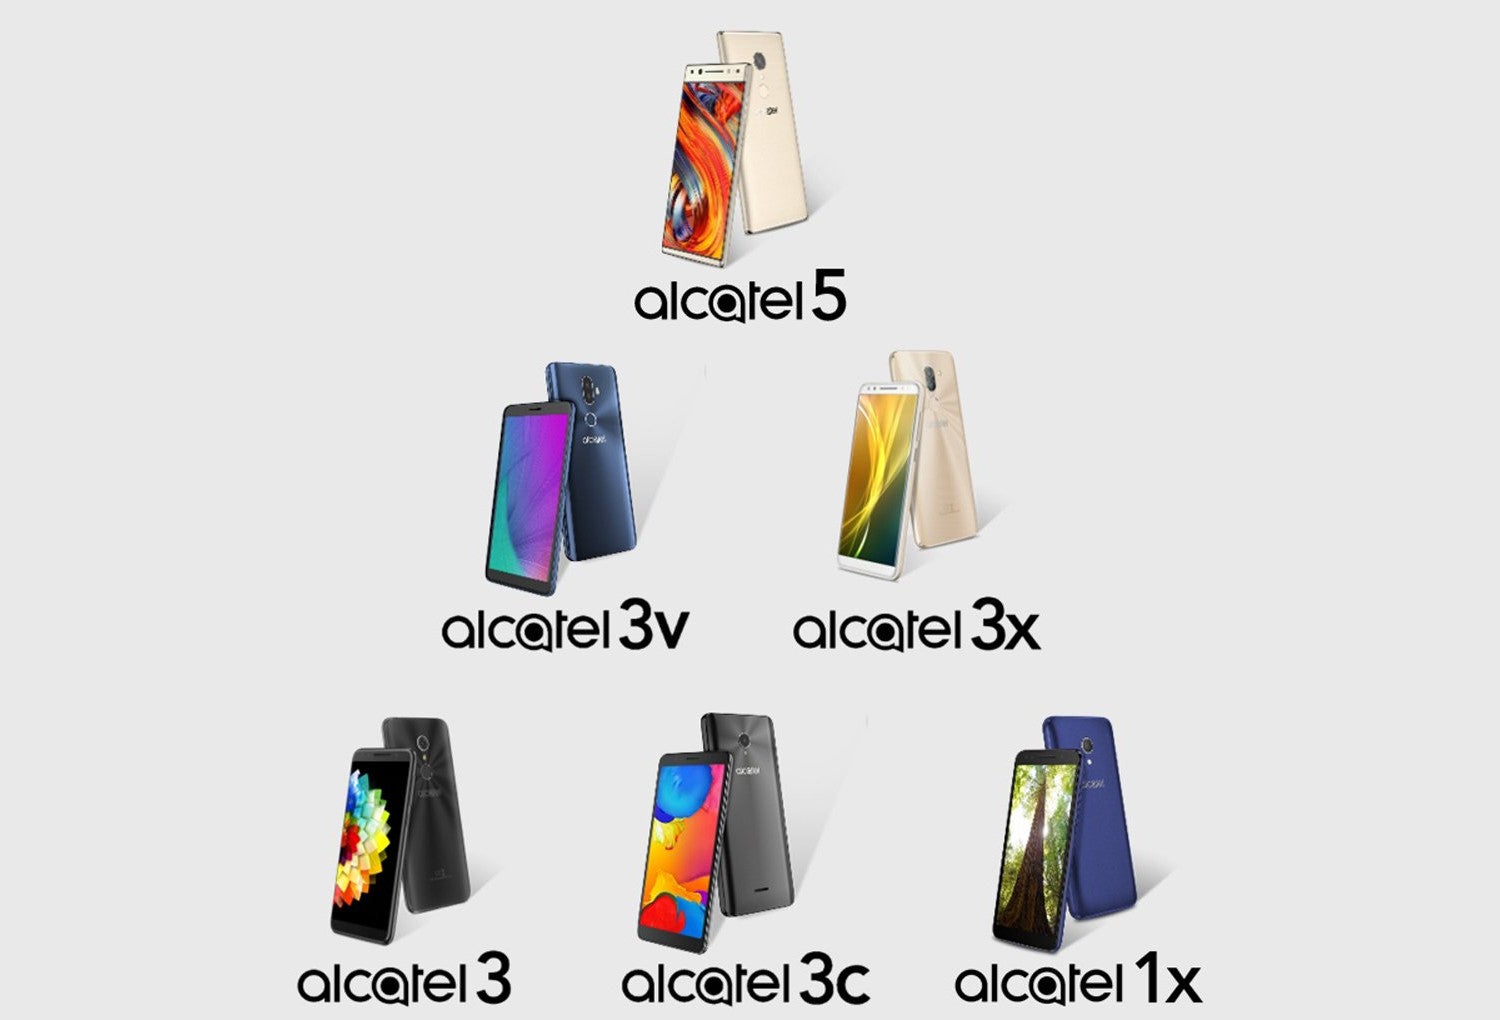 Have a peek at Alcatel's 2018 high-end lineup of smartphones before they get announced